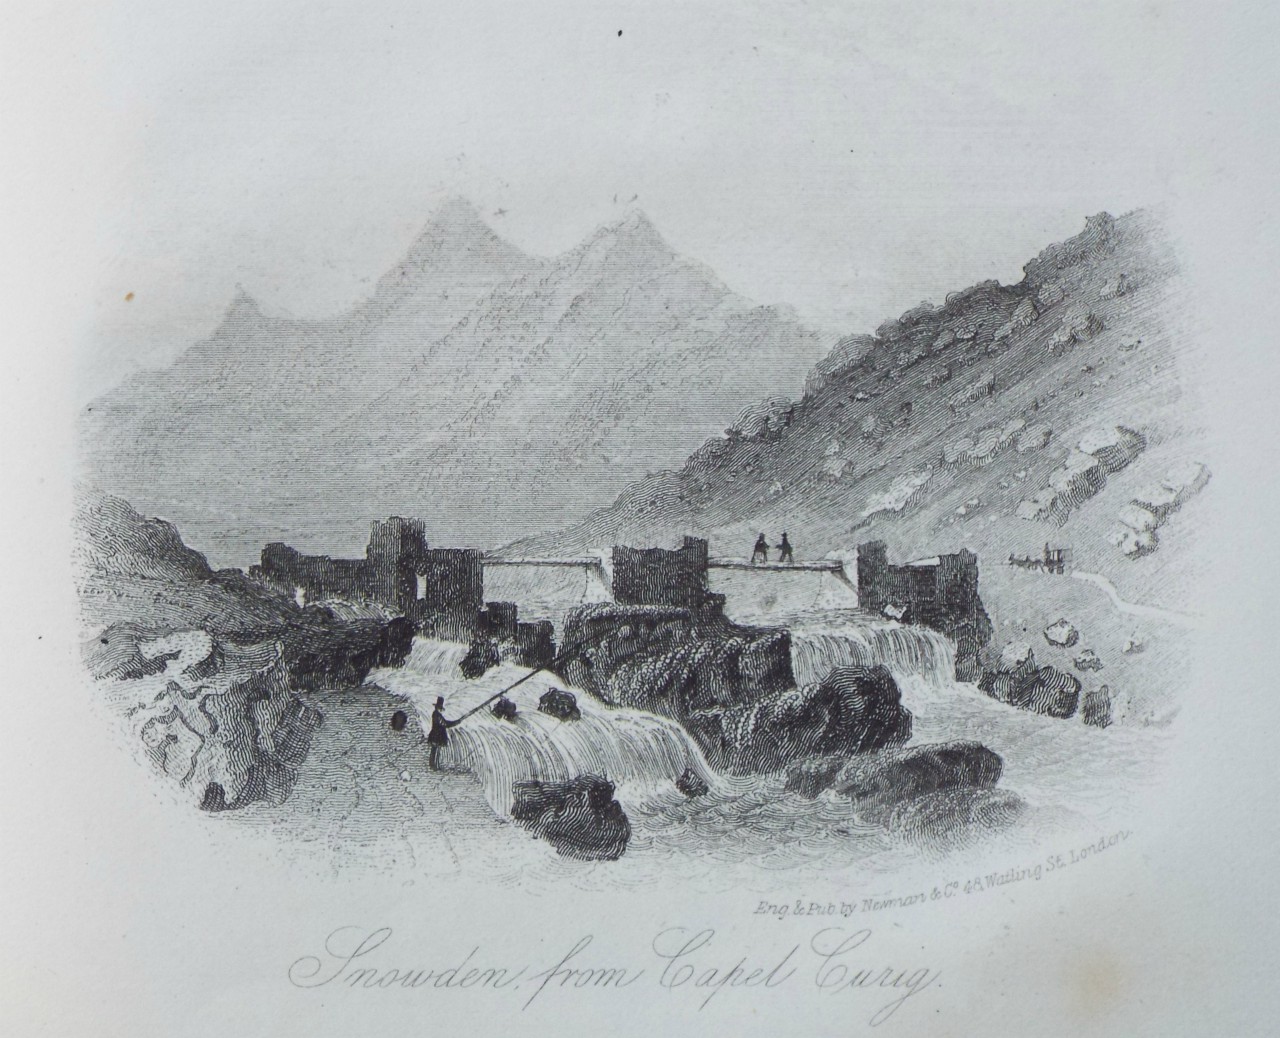 Steel Vignette - Snowdon, from Capel Curig. - Newman